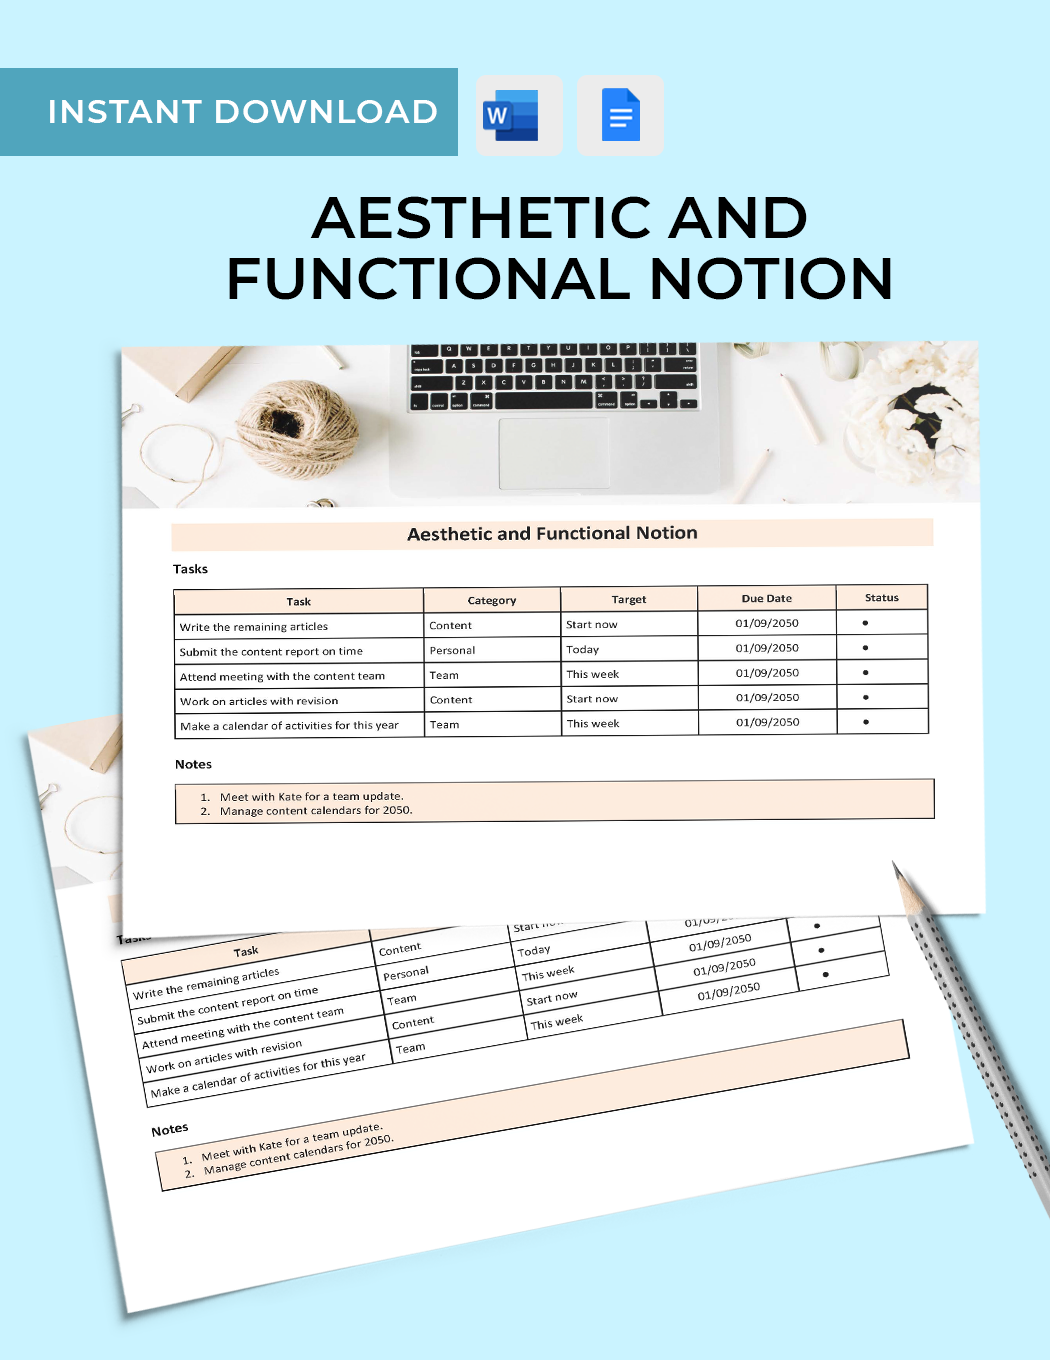 Free Aesthetic And Functional Notion Template